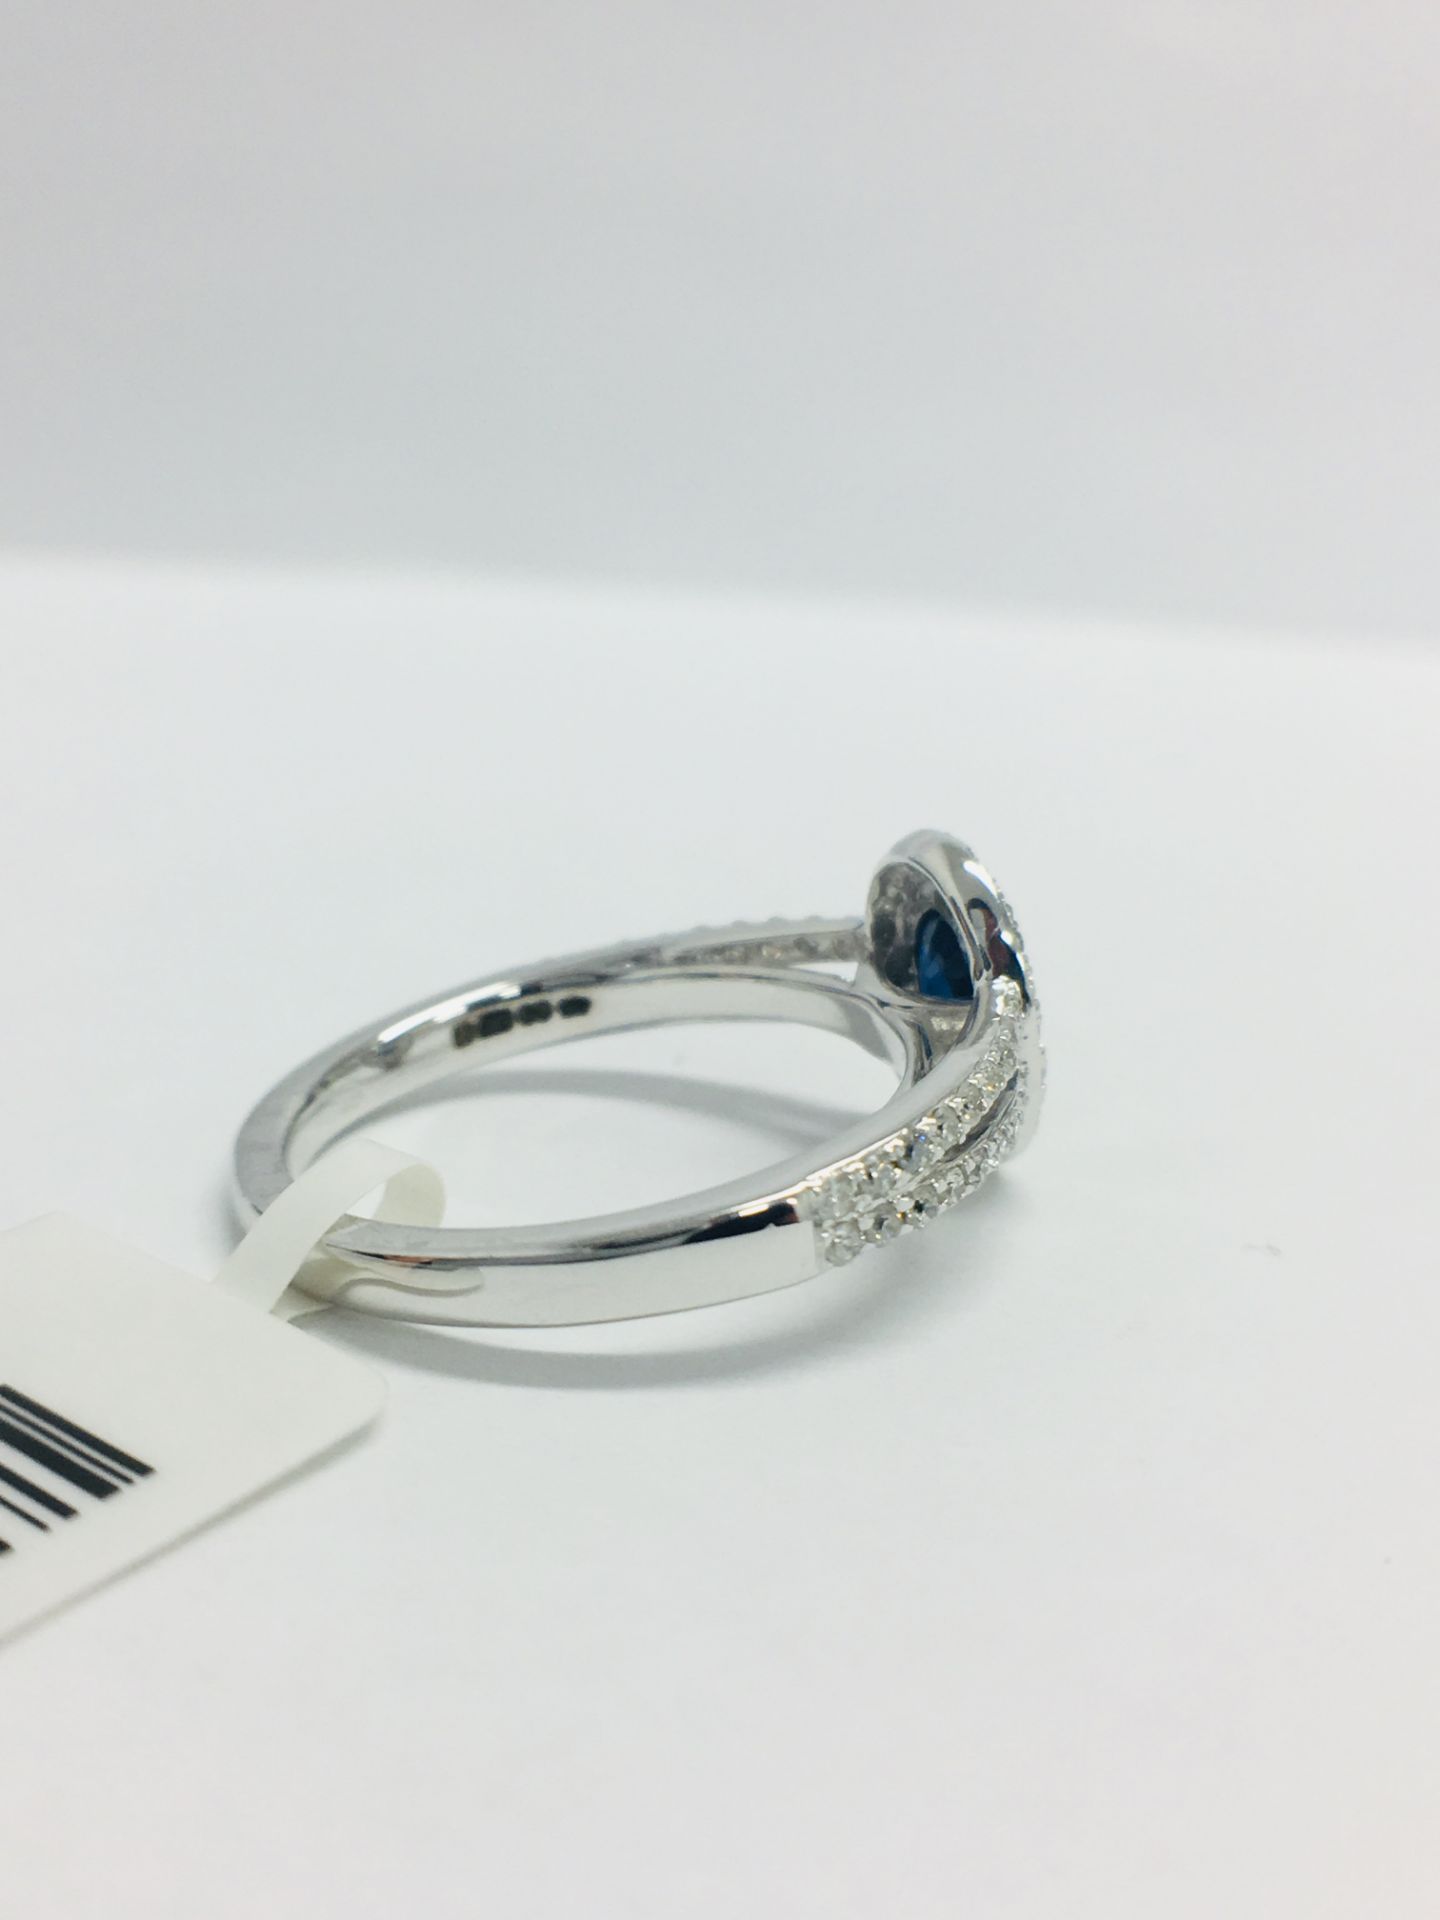 9ct White Gold Sapphire Diamond Cluster Ring - Image 6 of 11